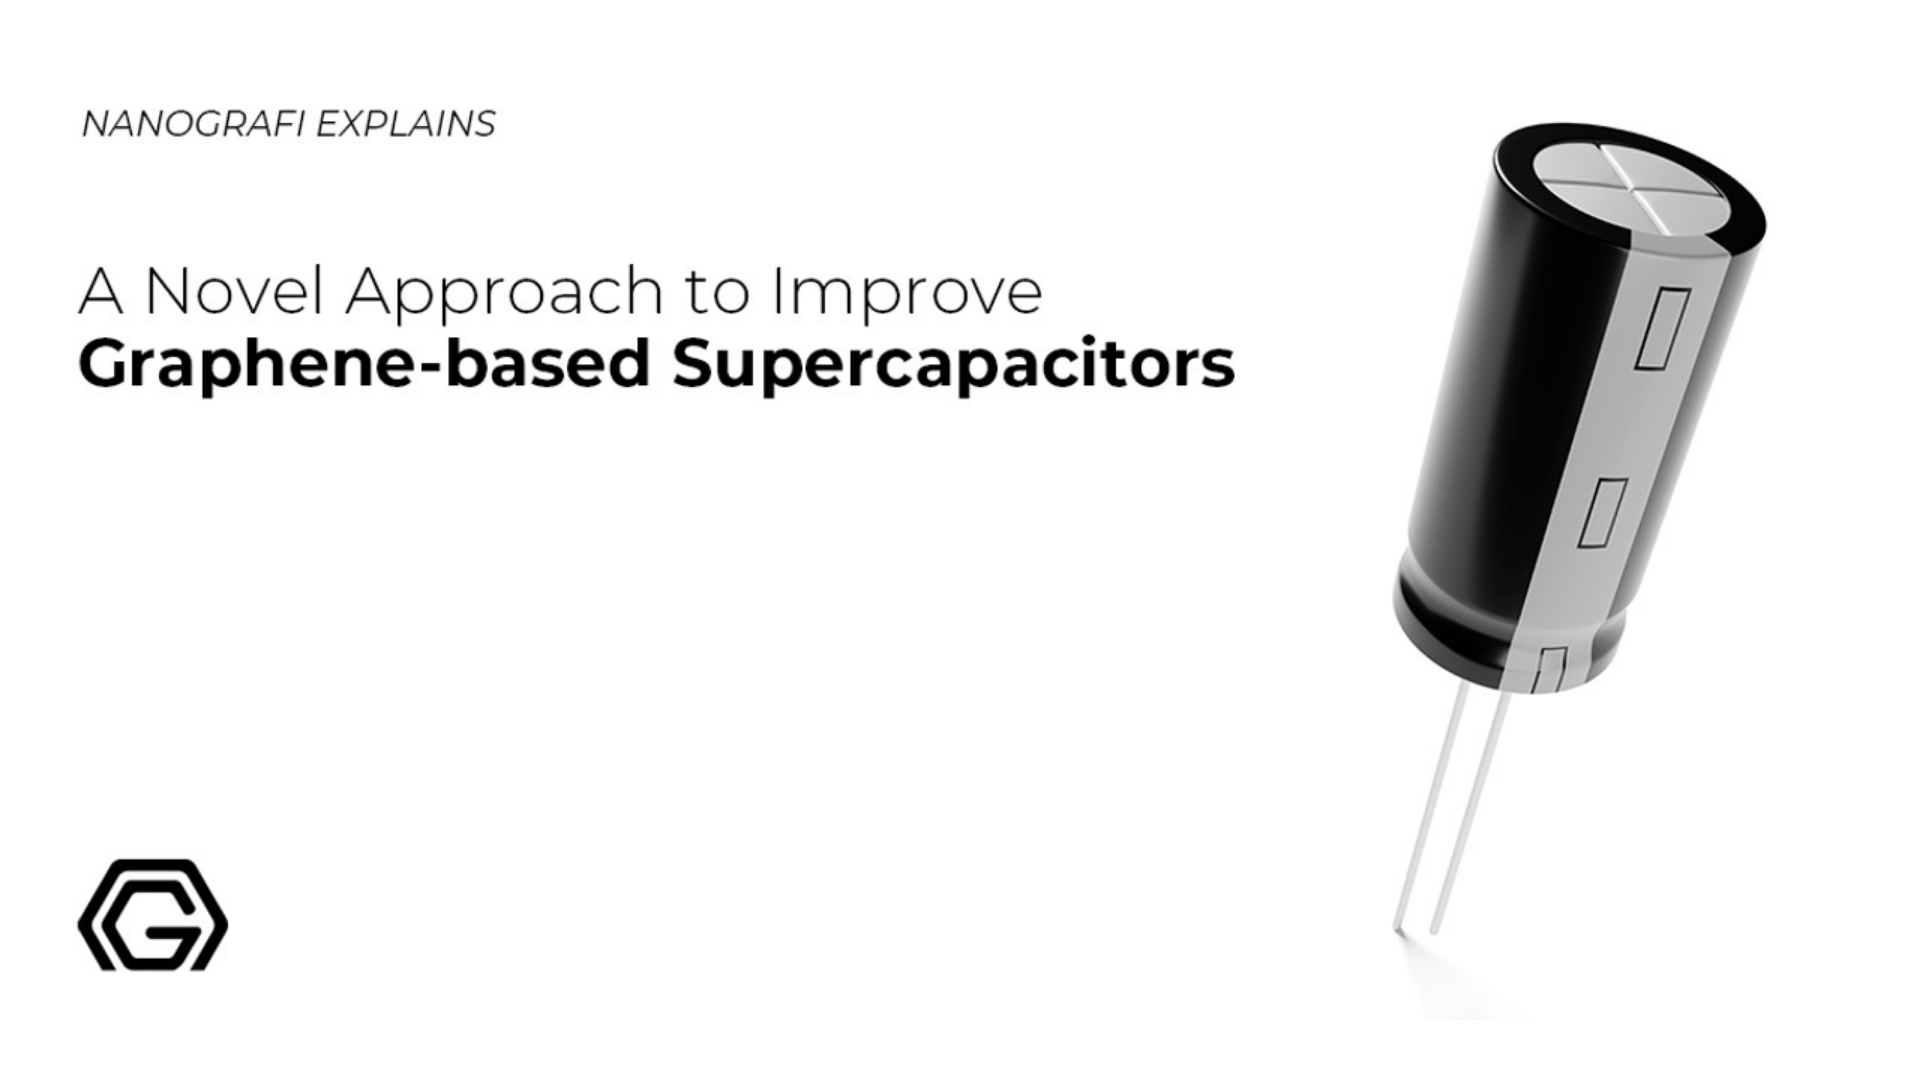 A novel approach to improve graphene-based supercapacitors